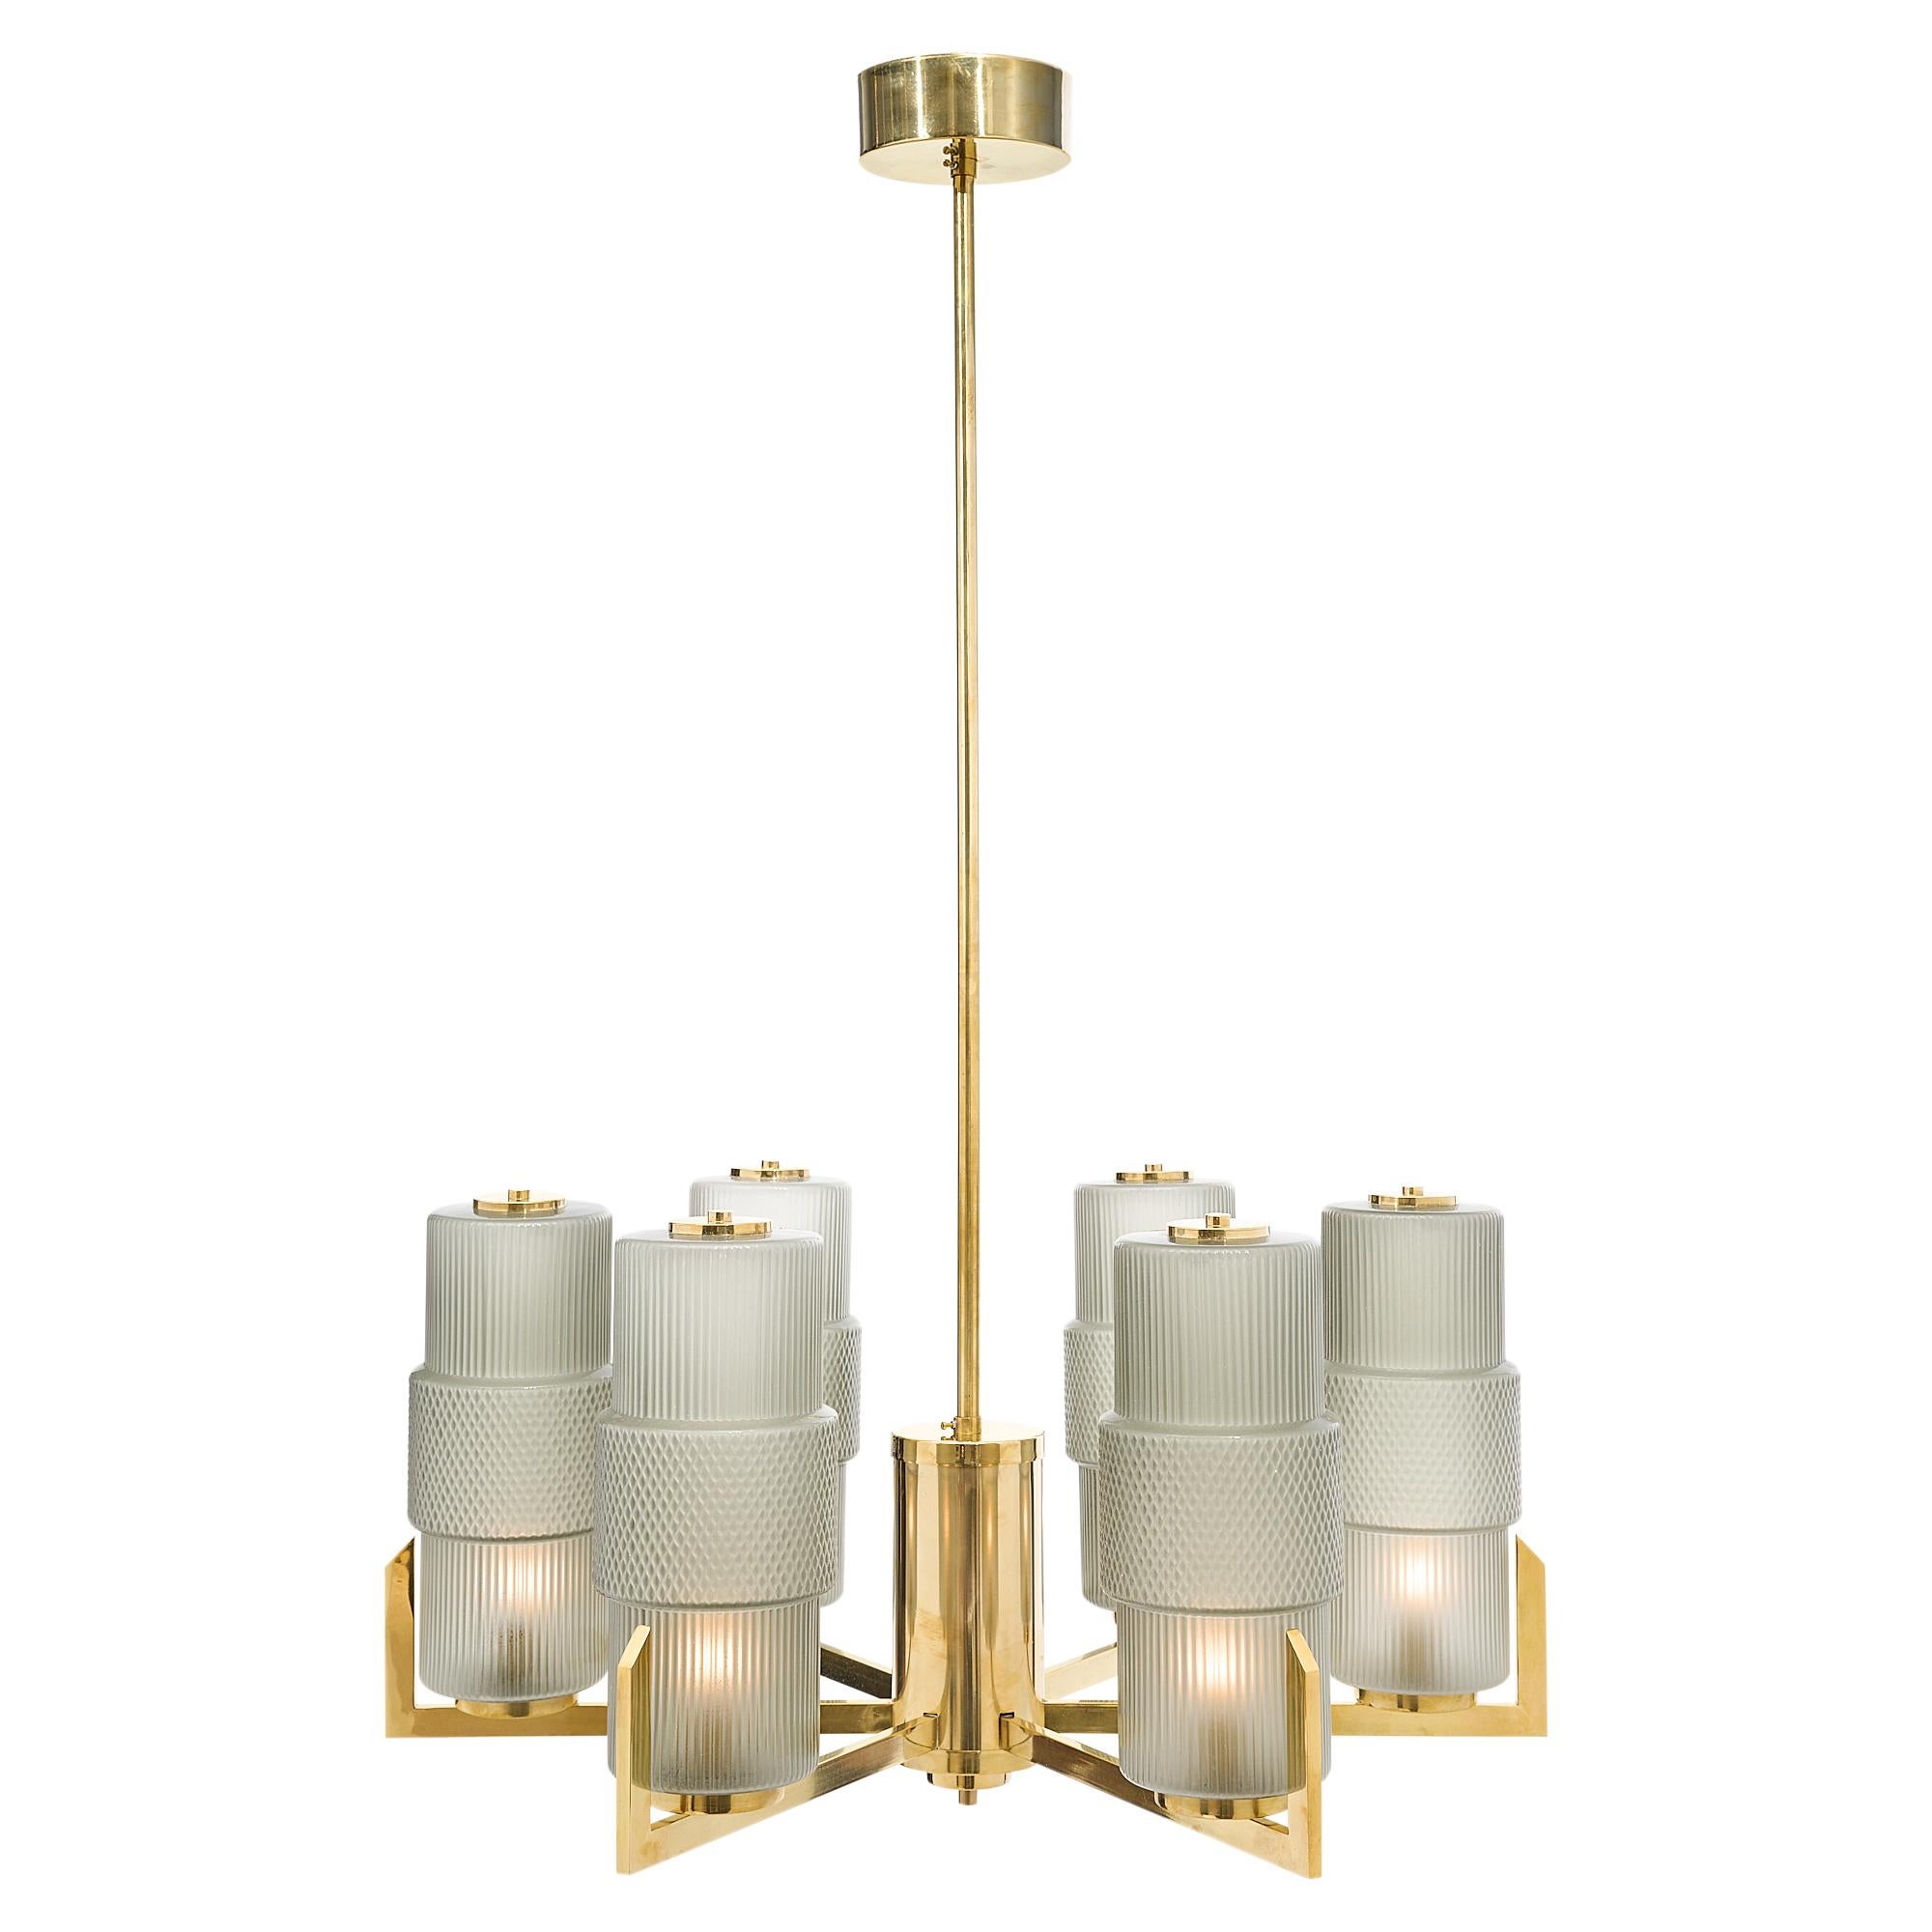 Spectacular brass and glass modernist chandeliers with a 6 branch solid brass structures and textured hand blown Murano glass components. A boldly modern chandelier with a very noble neoclassical feel about it, one of our favorites. The price is for